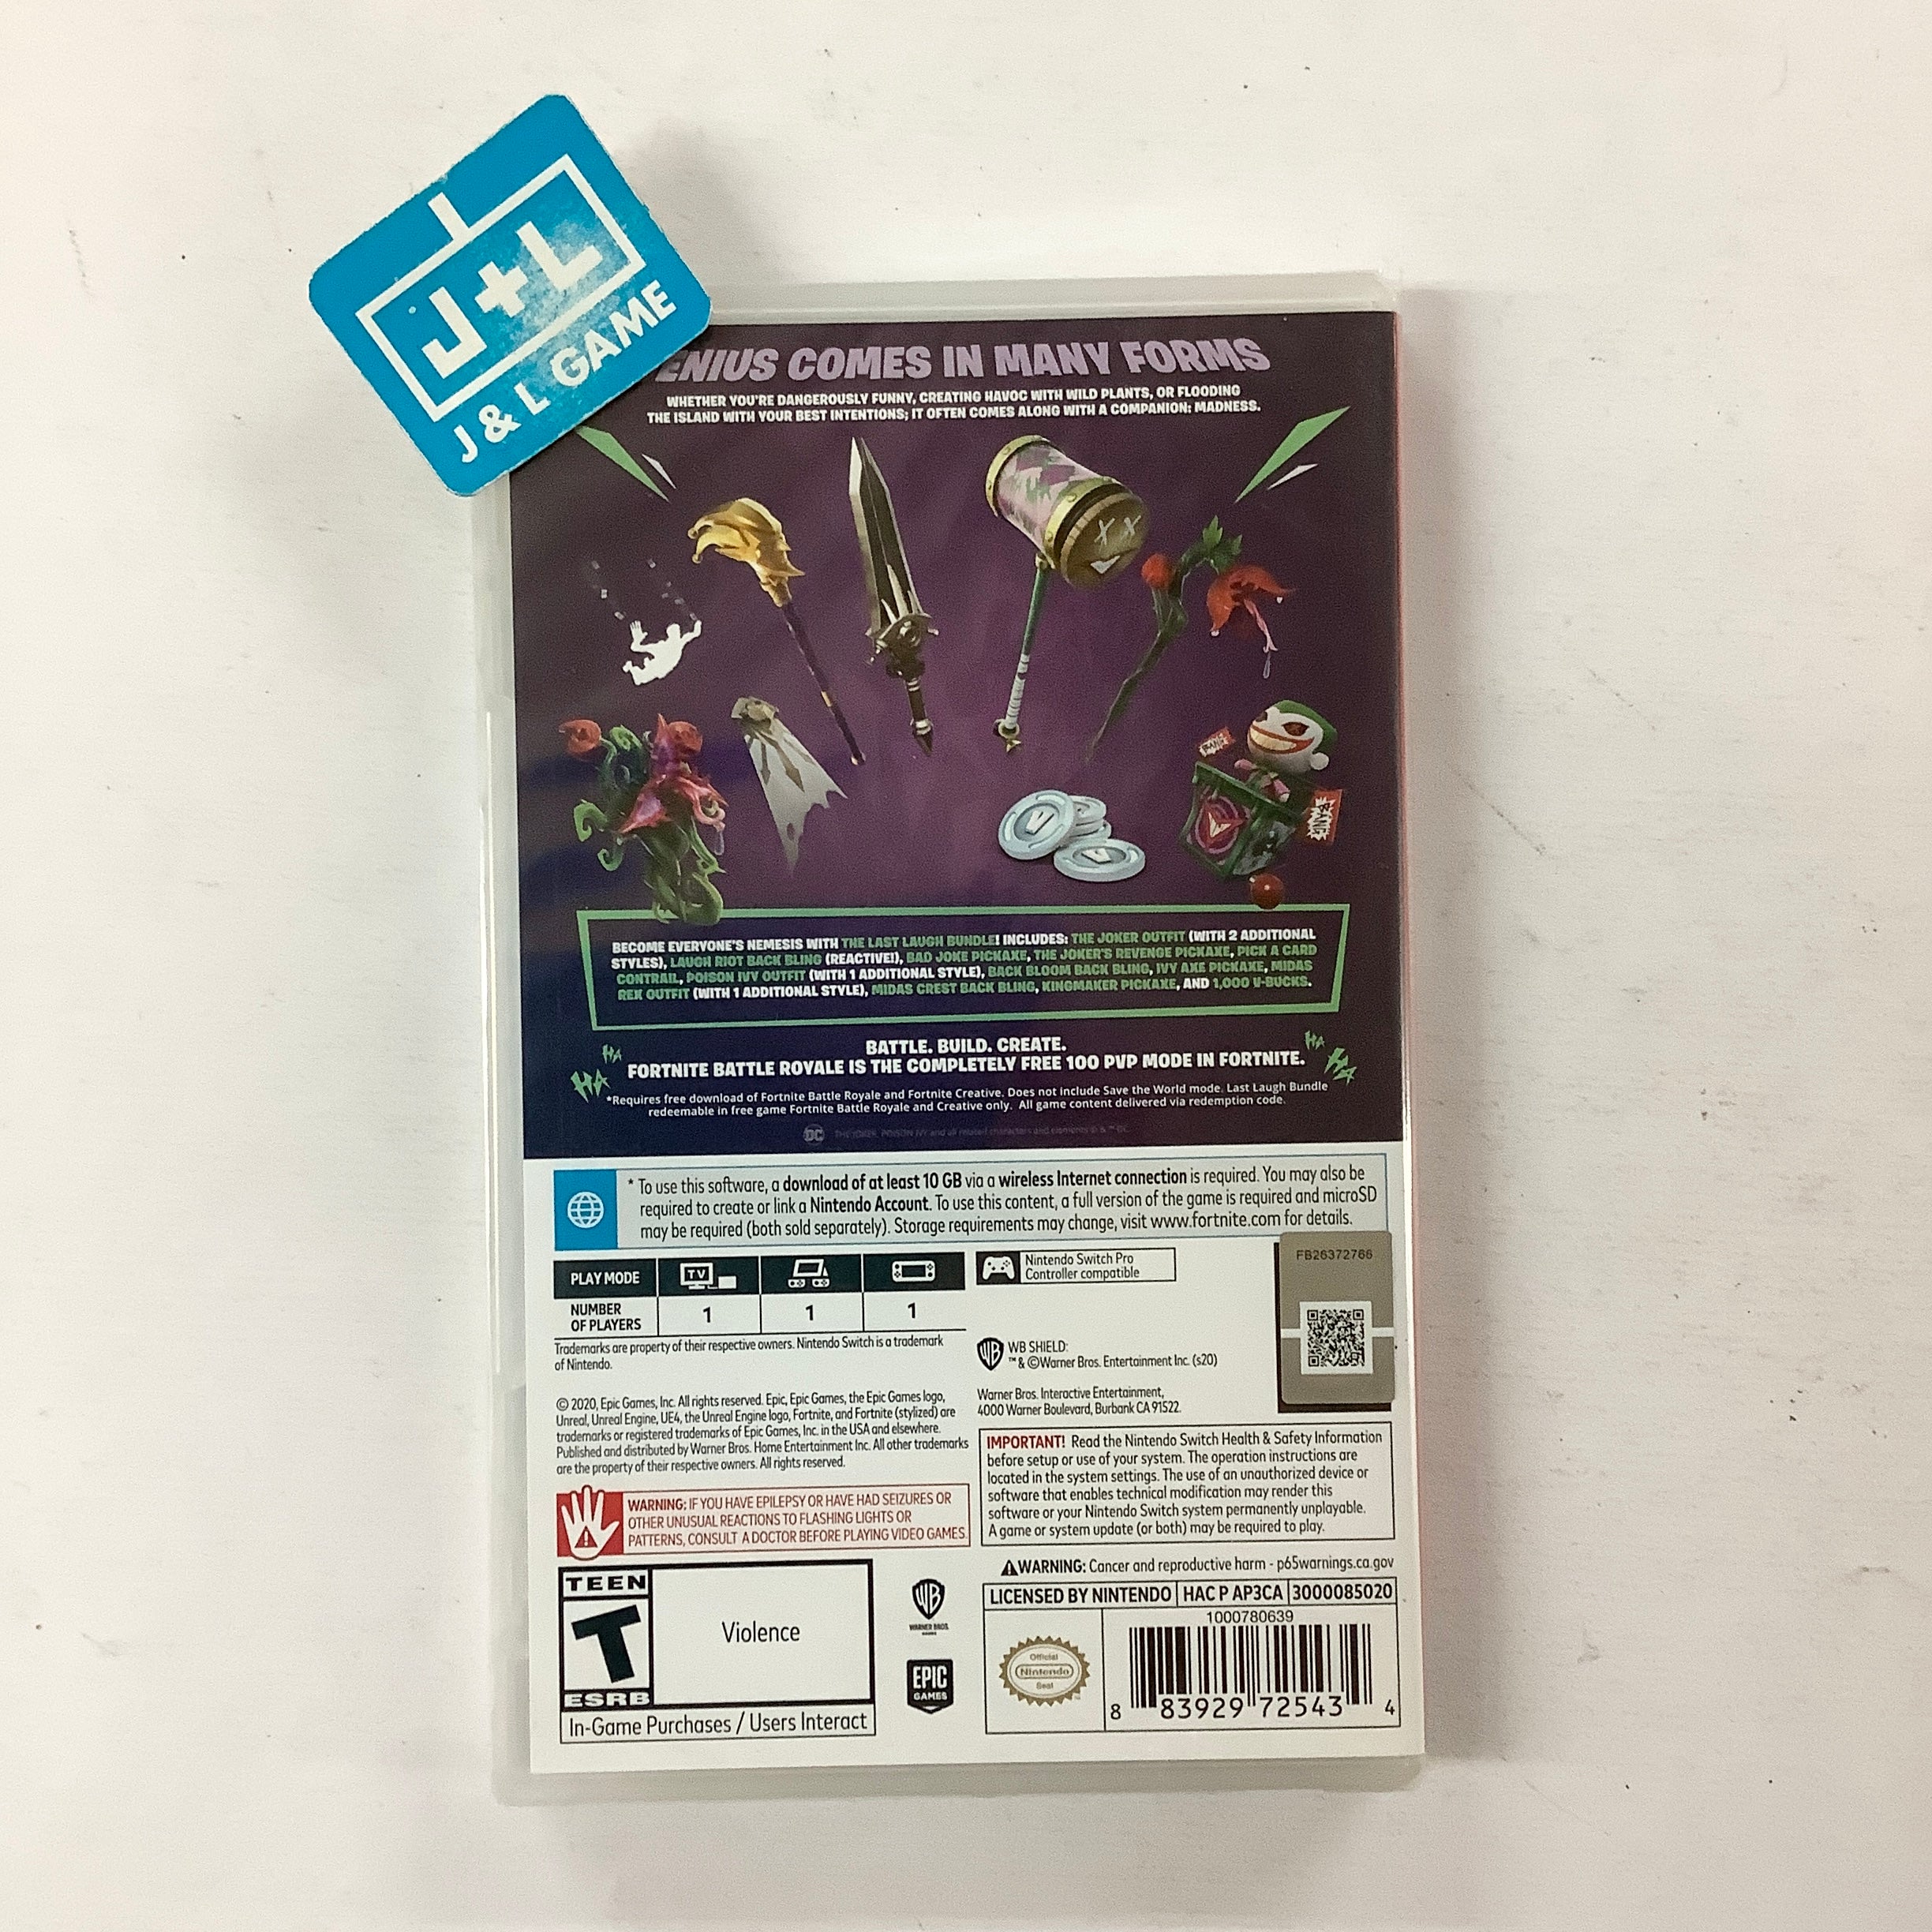 Fortnite The Last Laugh Bundle (No Game Card) - (NSW) Nintendo Switch Video Games Warner Bros. Interactive Entertainment   